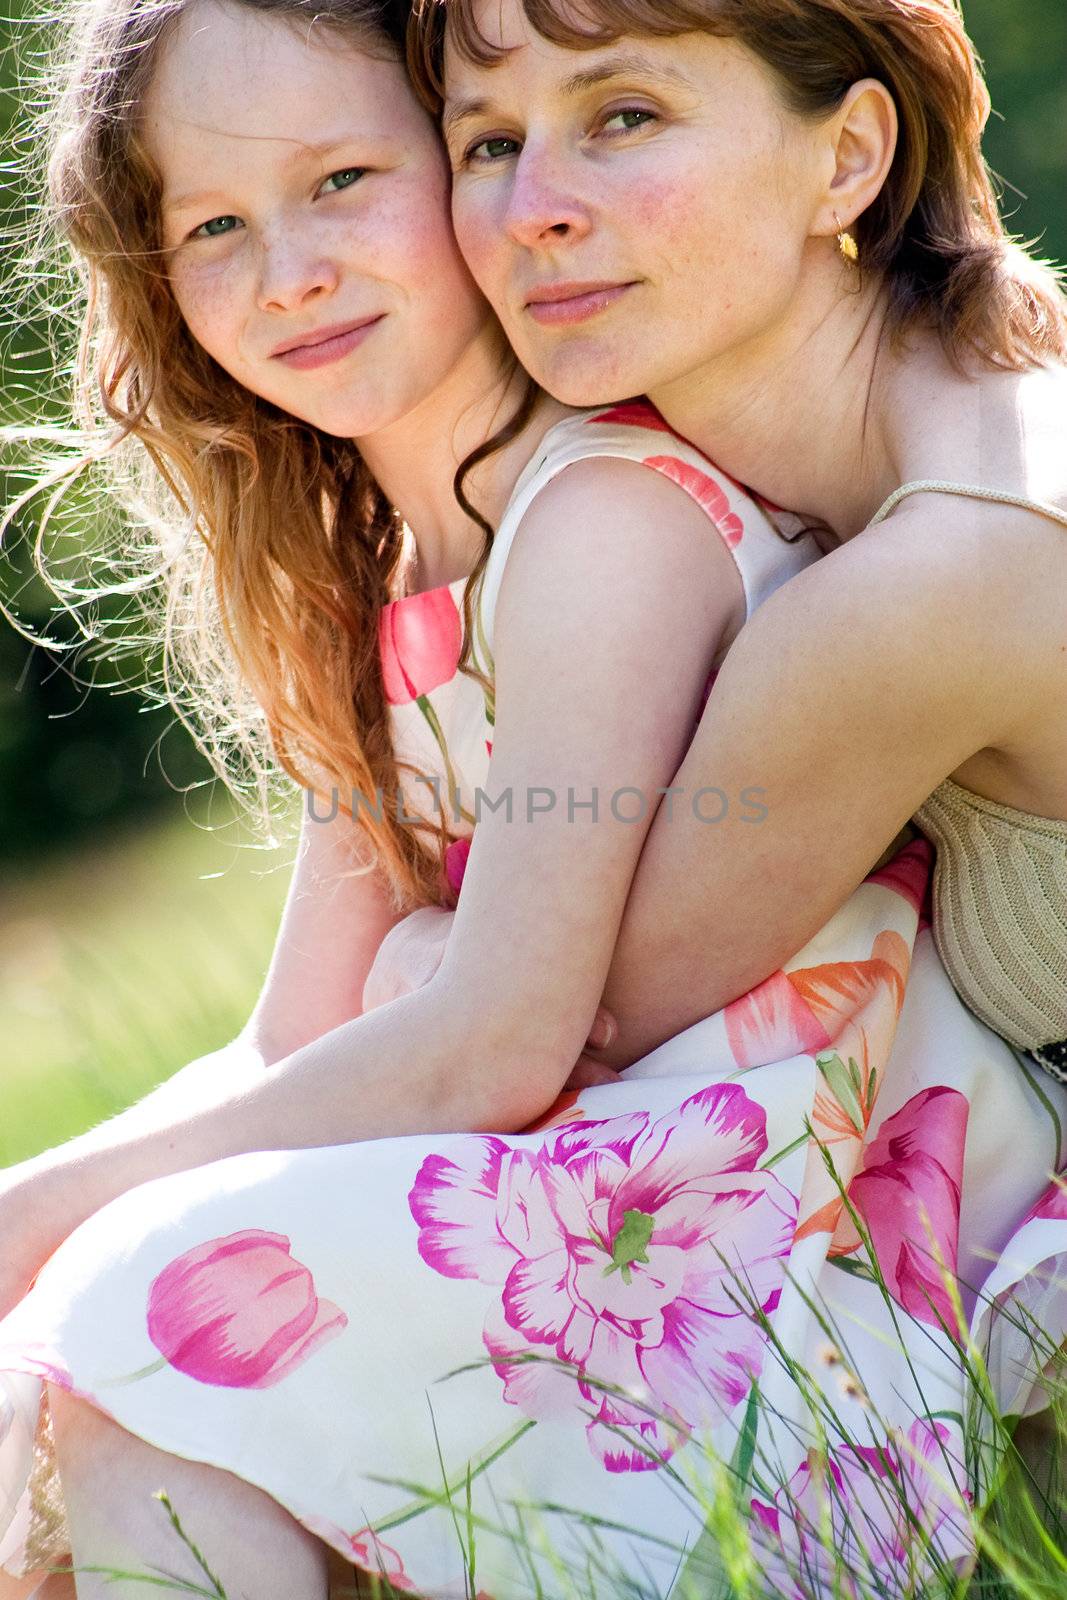 Mother and daughter have a happy time together